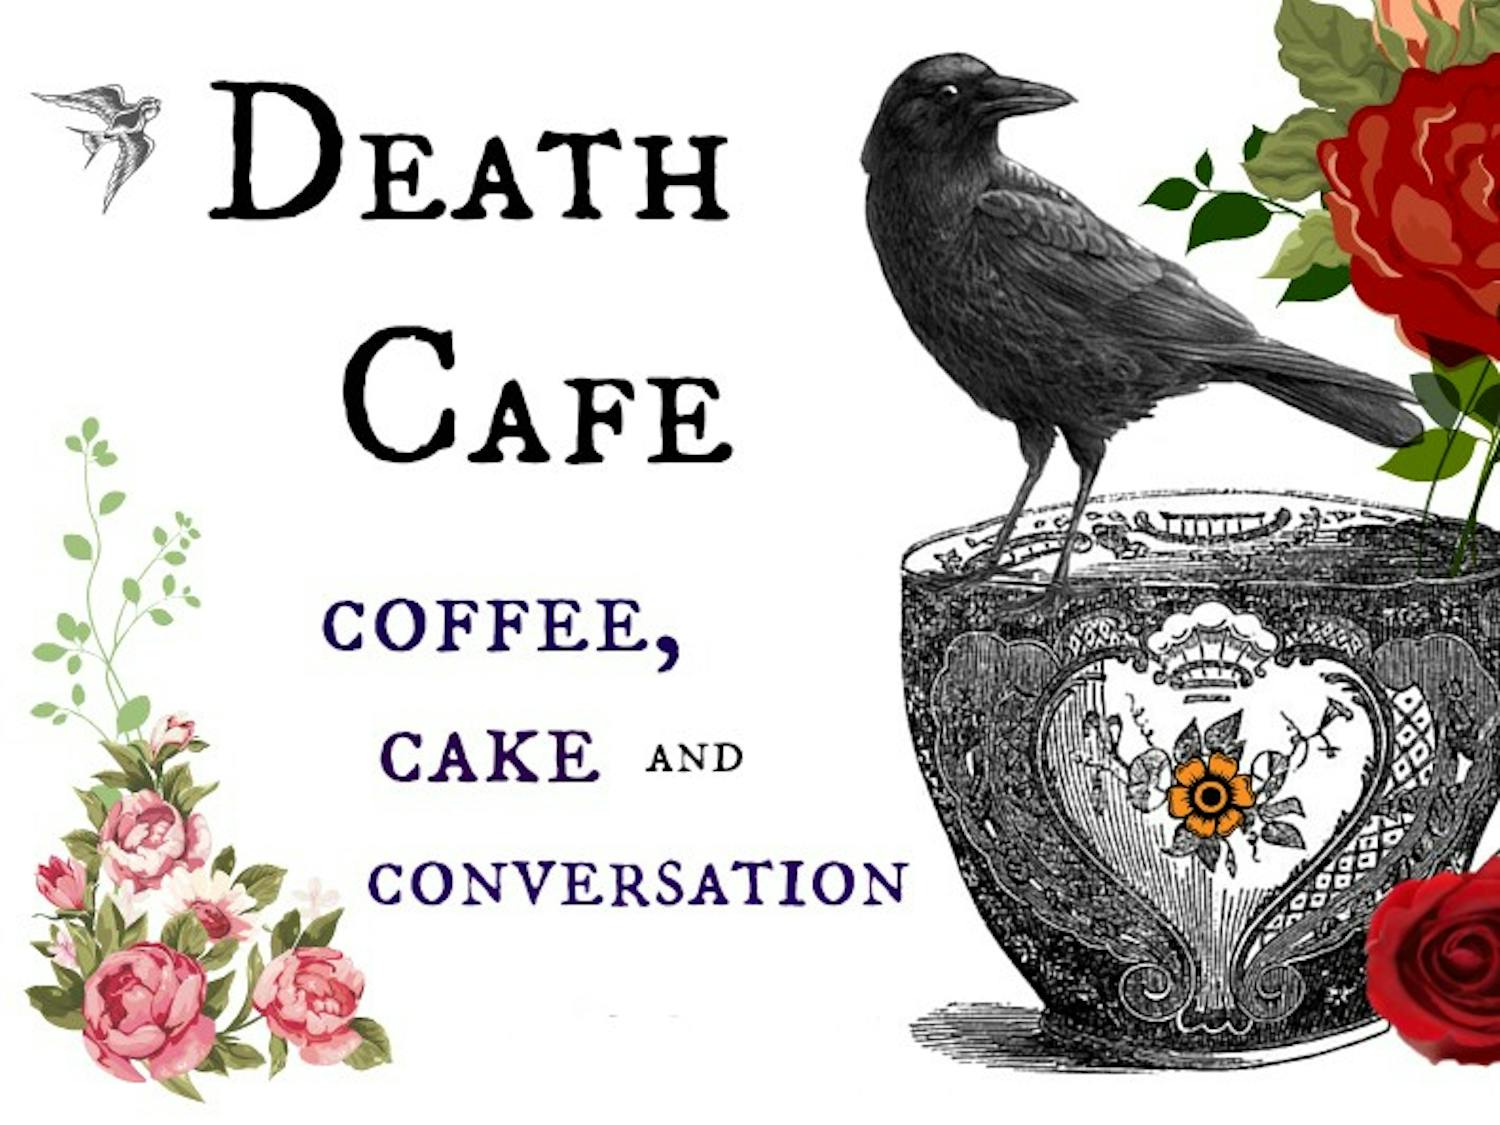 Death Café is a place to “gather to eat cake, drink tea and discuss death.”